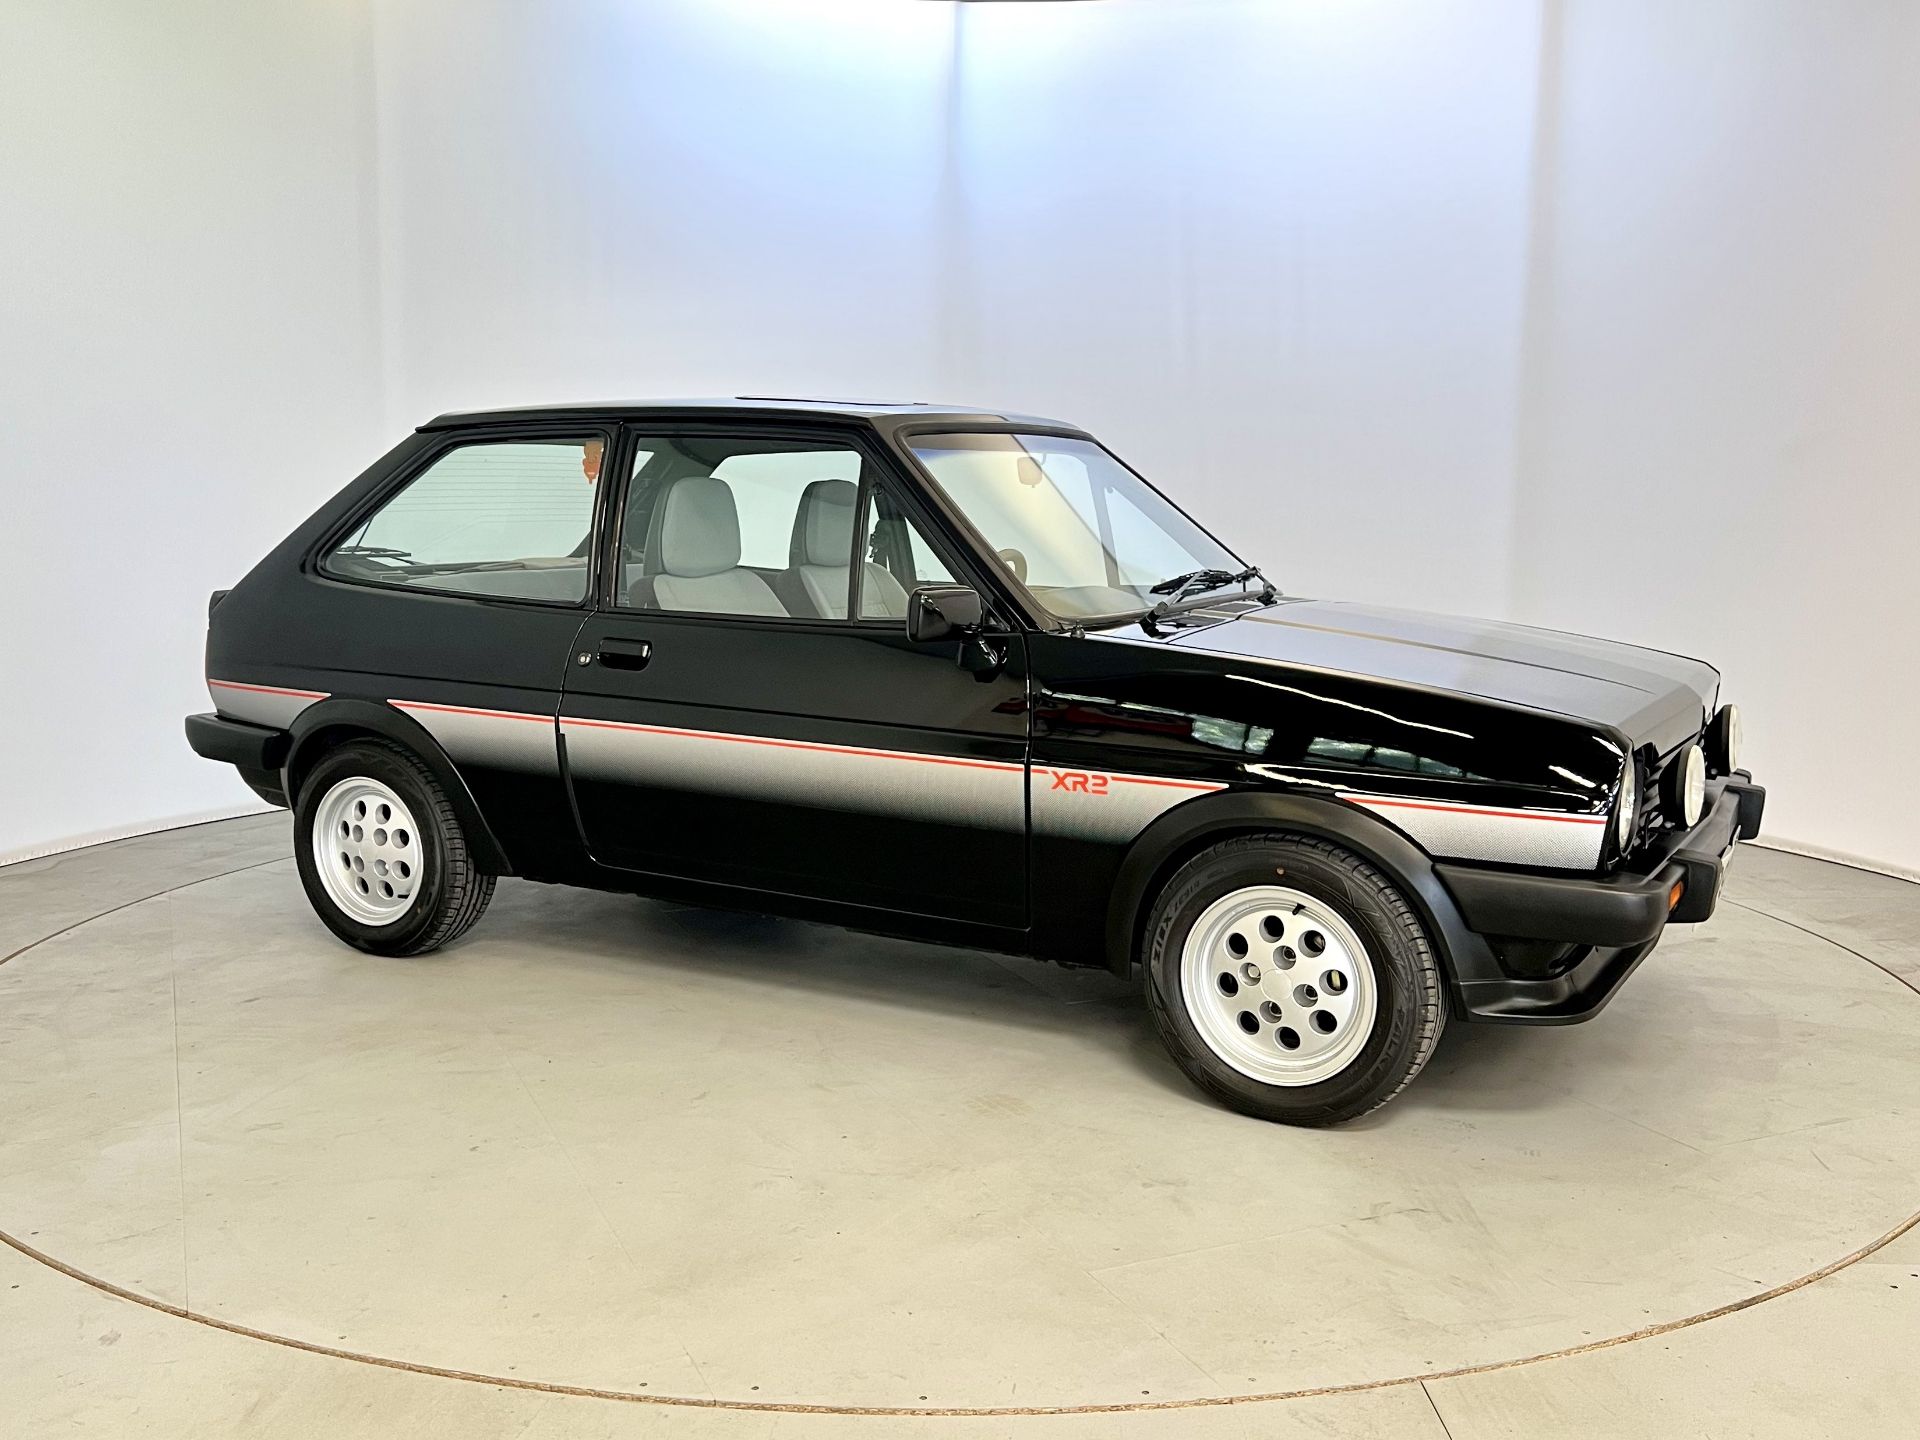 Ford Fiesta XR2 - Image 12 of 33